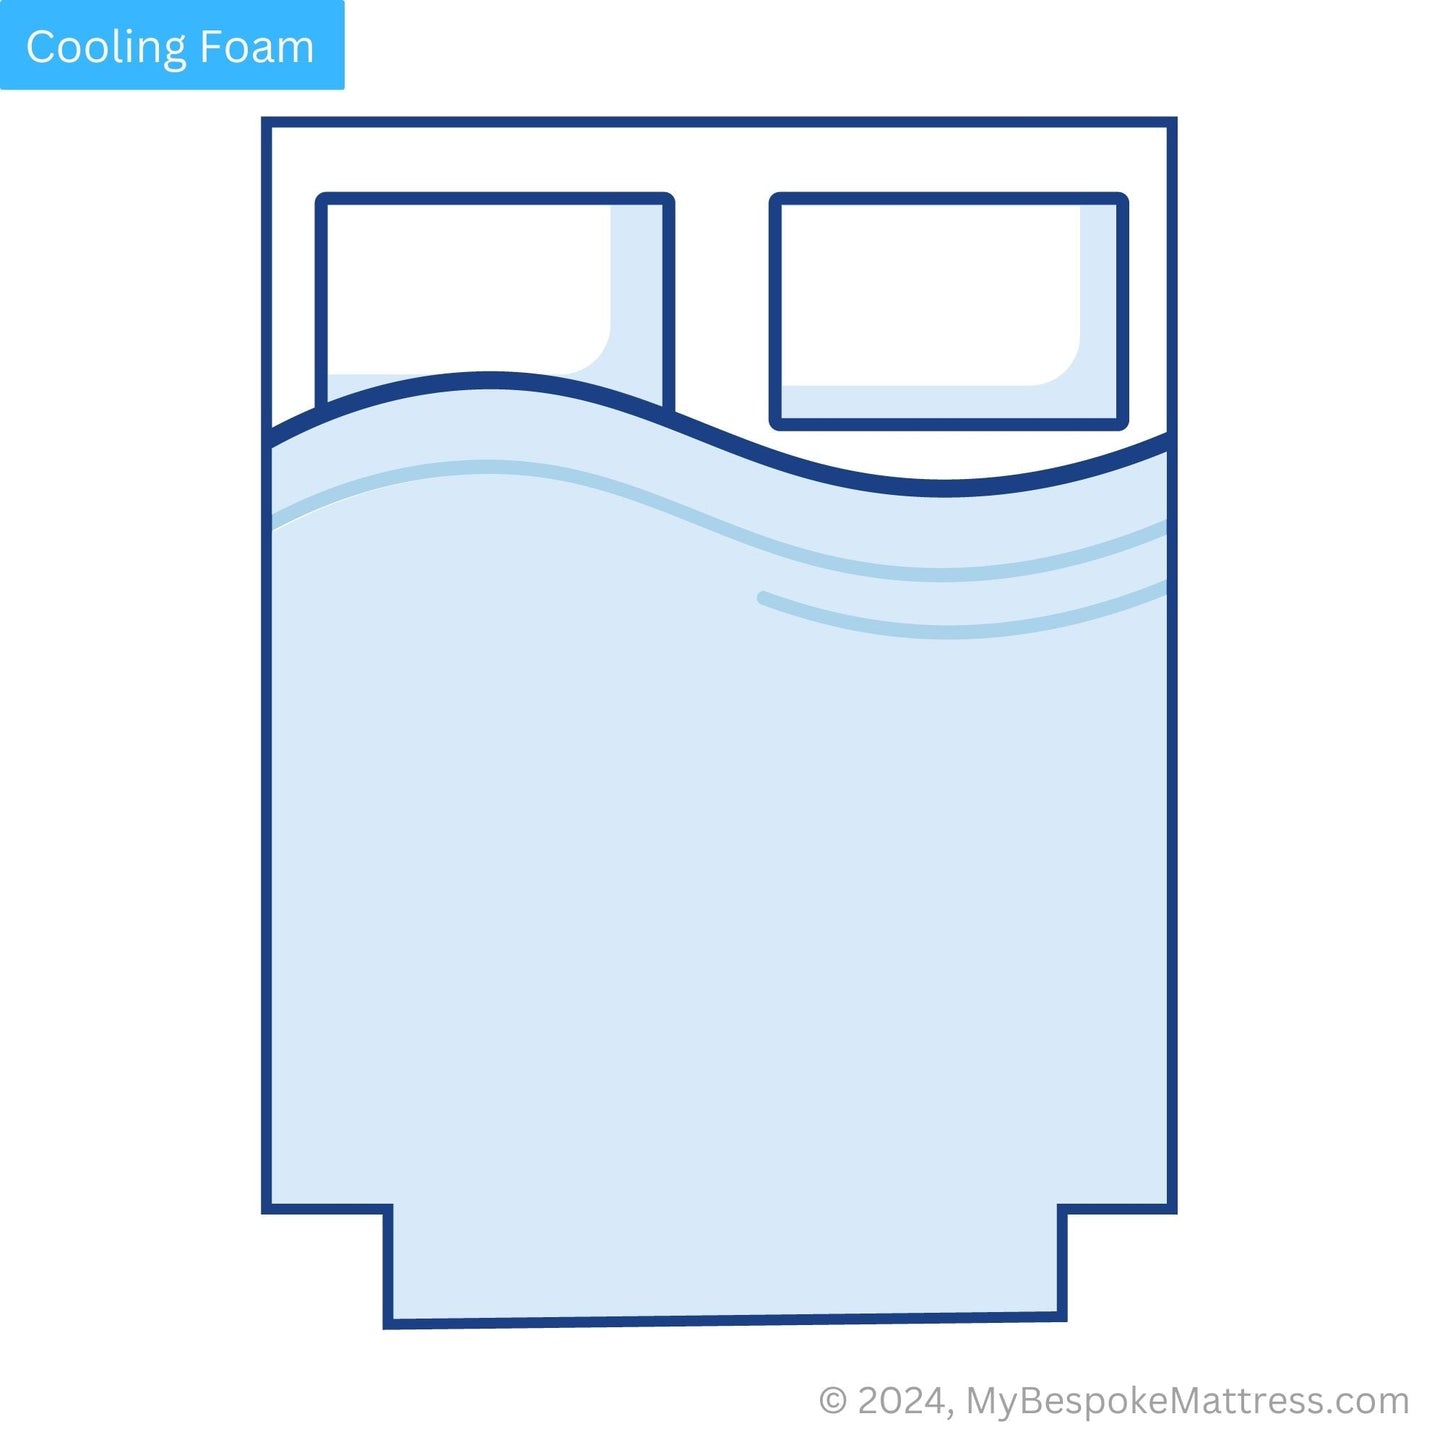 Custom cooling foam mattress topper with two square corner cutouts at the foot end, designed for a perfect fit and optimal space around your bed.